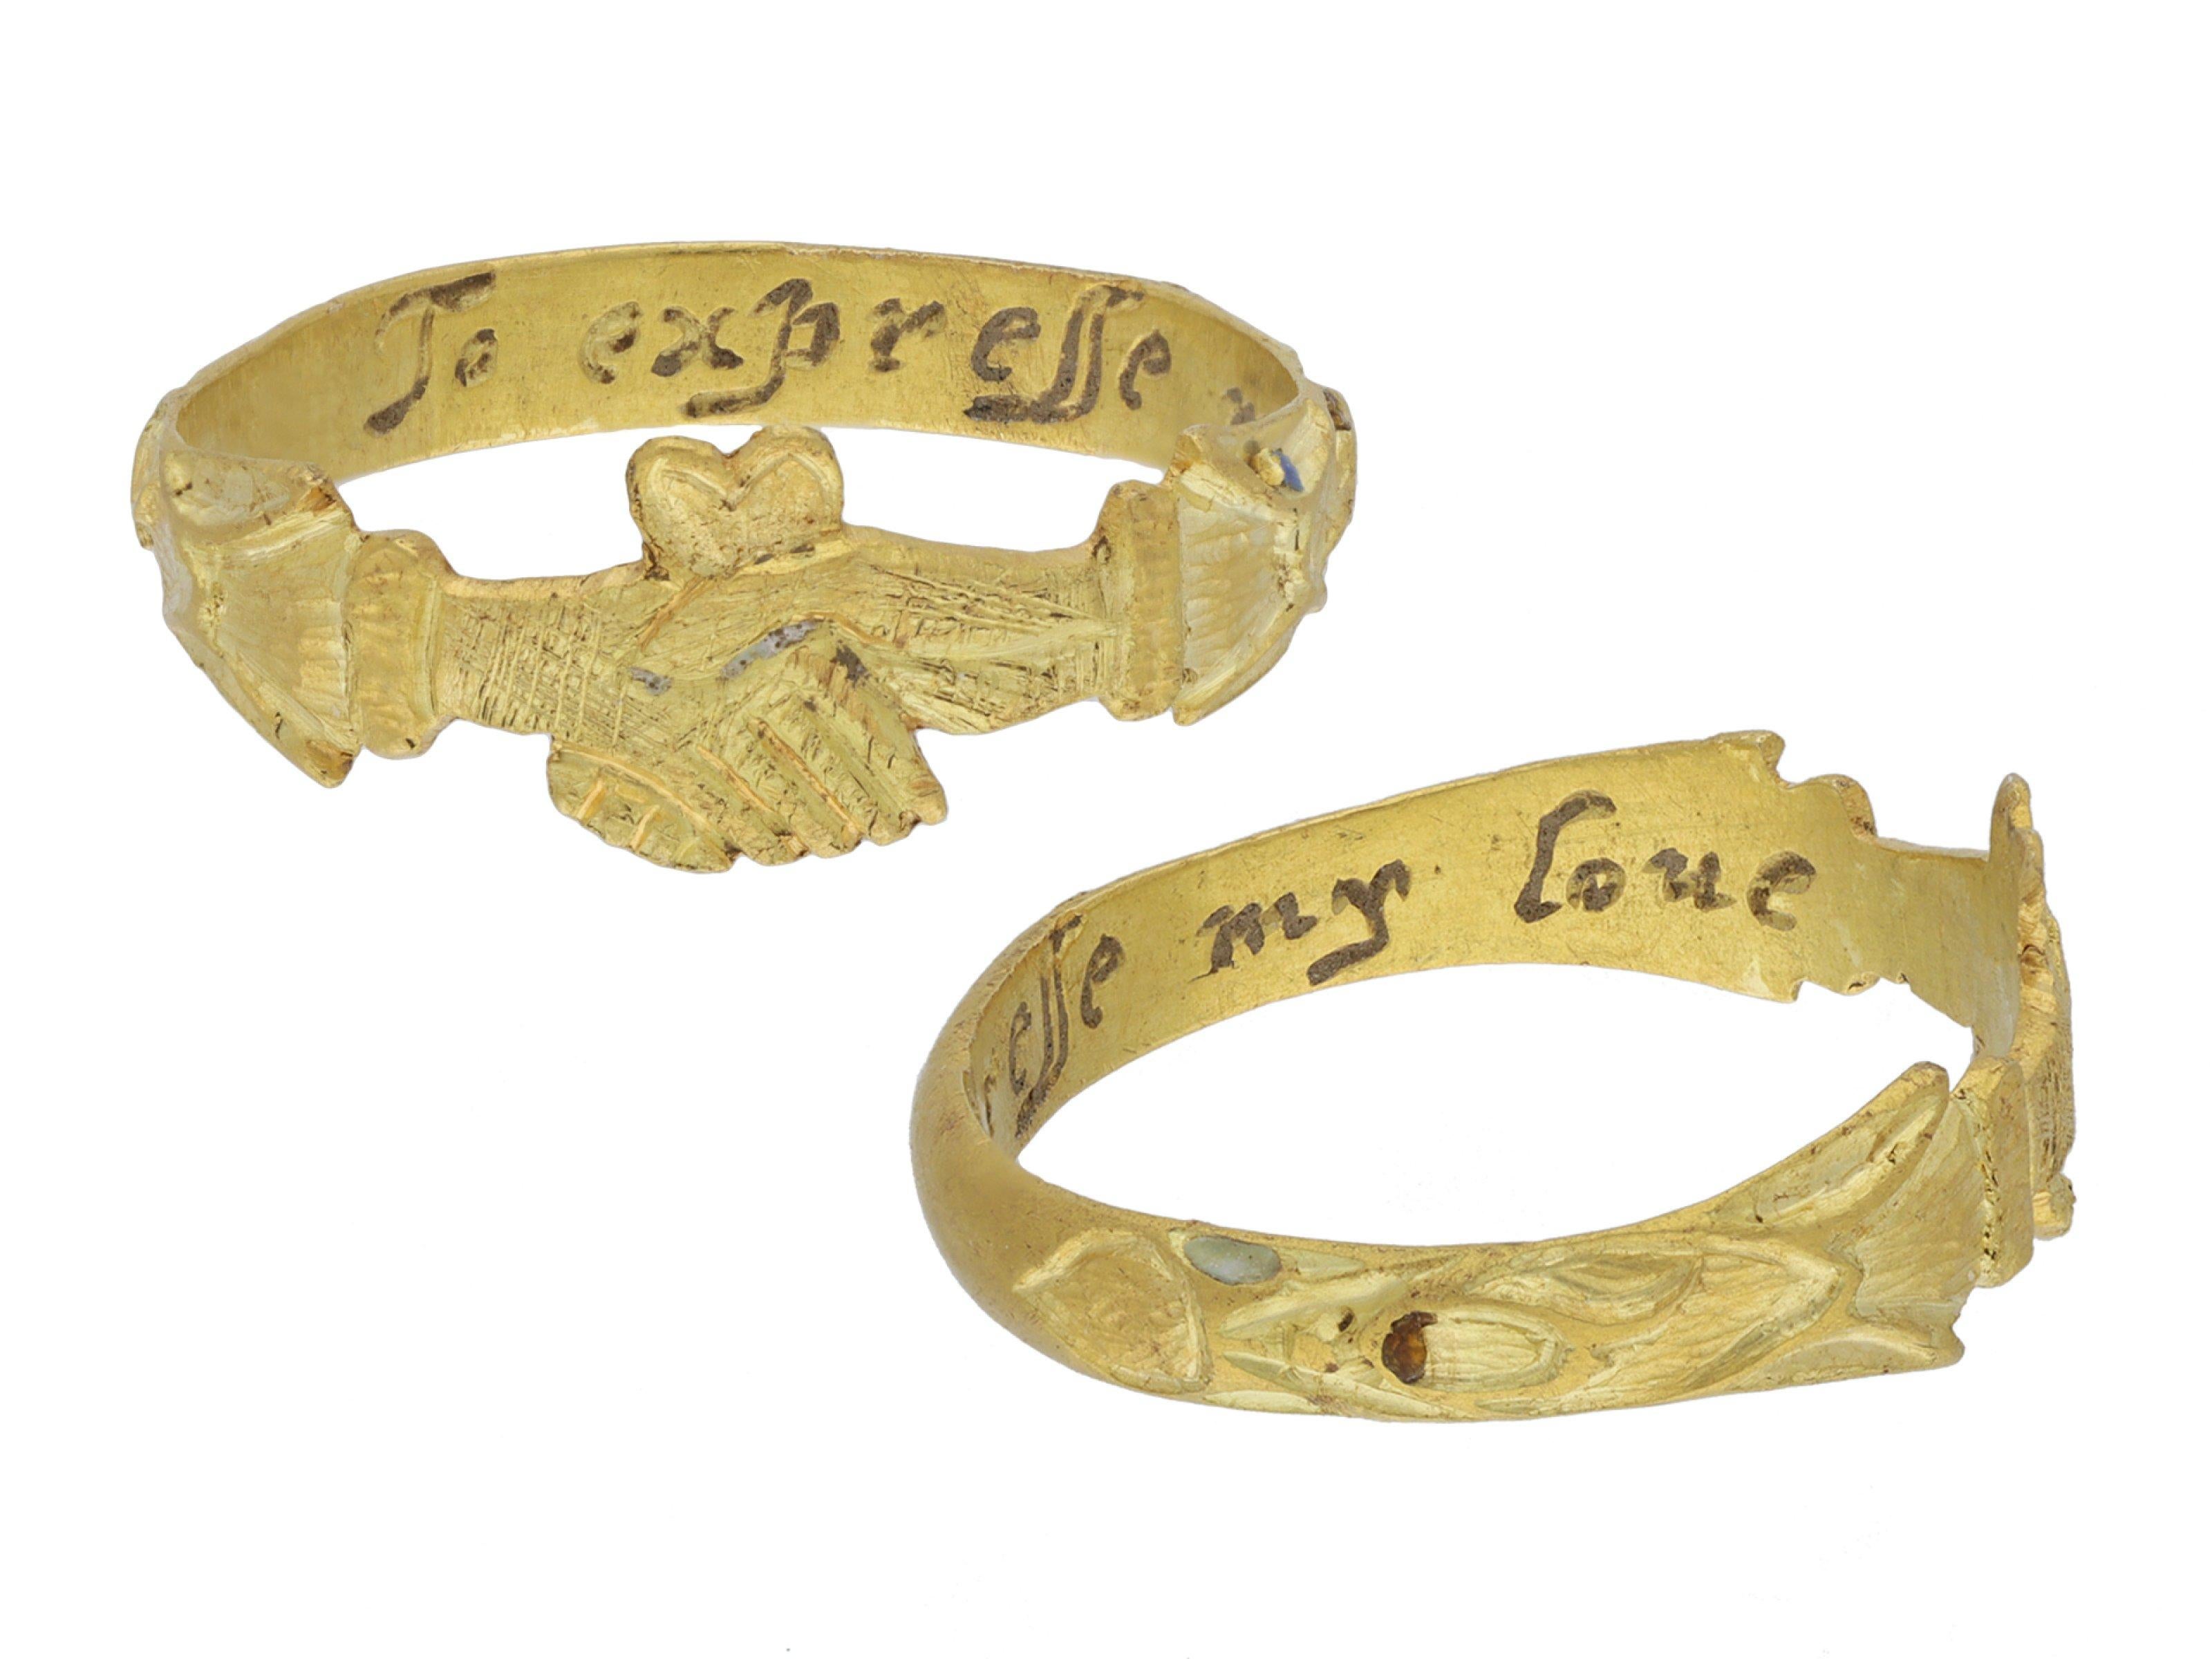 Post Medieval fede ring with posy, circa 1650-1720. A yellow gold fede ring, finely carved to centre with a pair of clasping hands, set above with a heart shape motif, leading to intricate shoulders with ornate cuff detailing with traces of yellow,